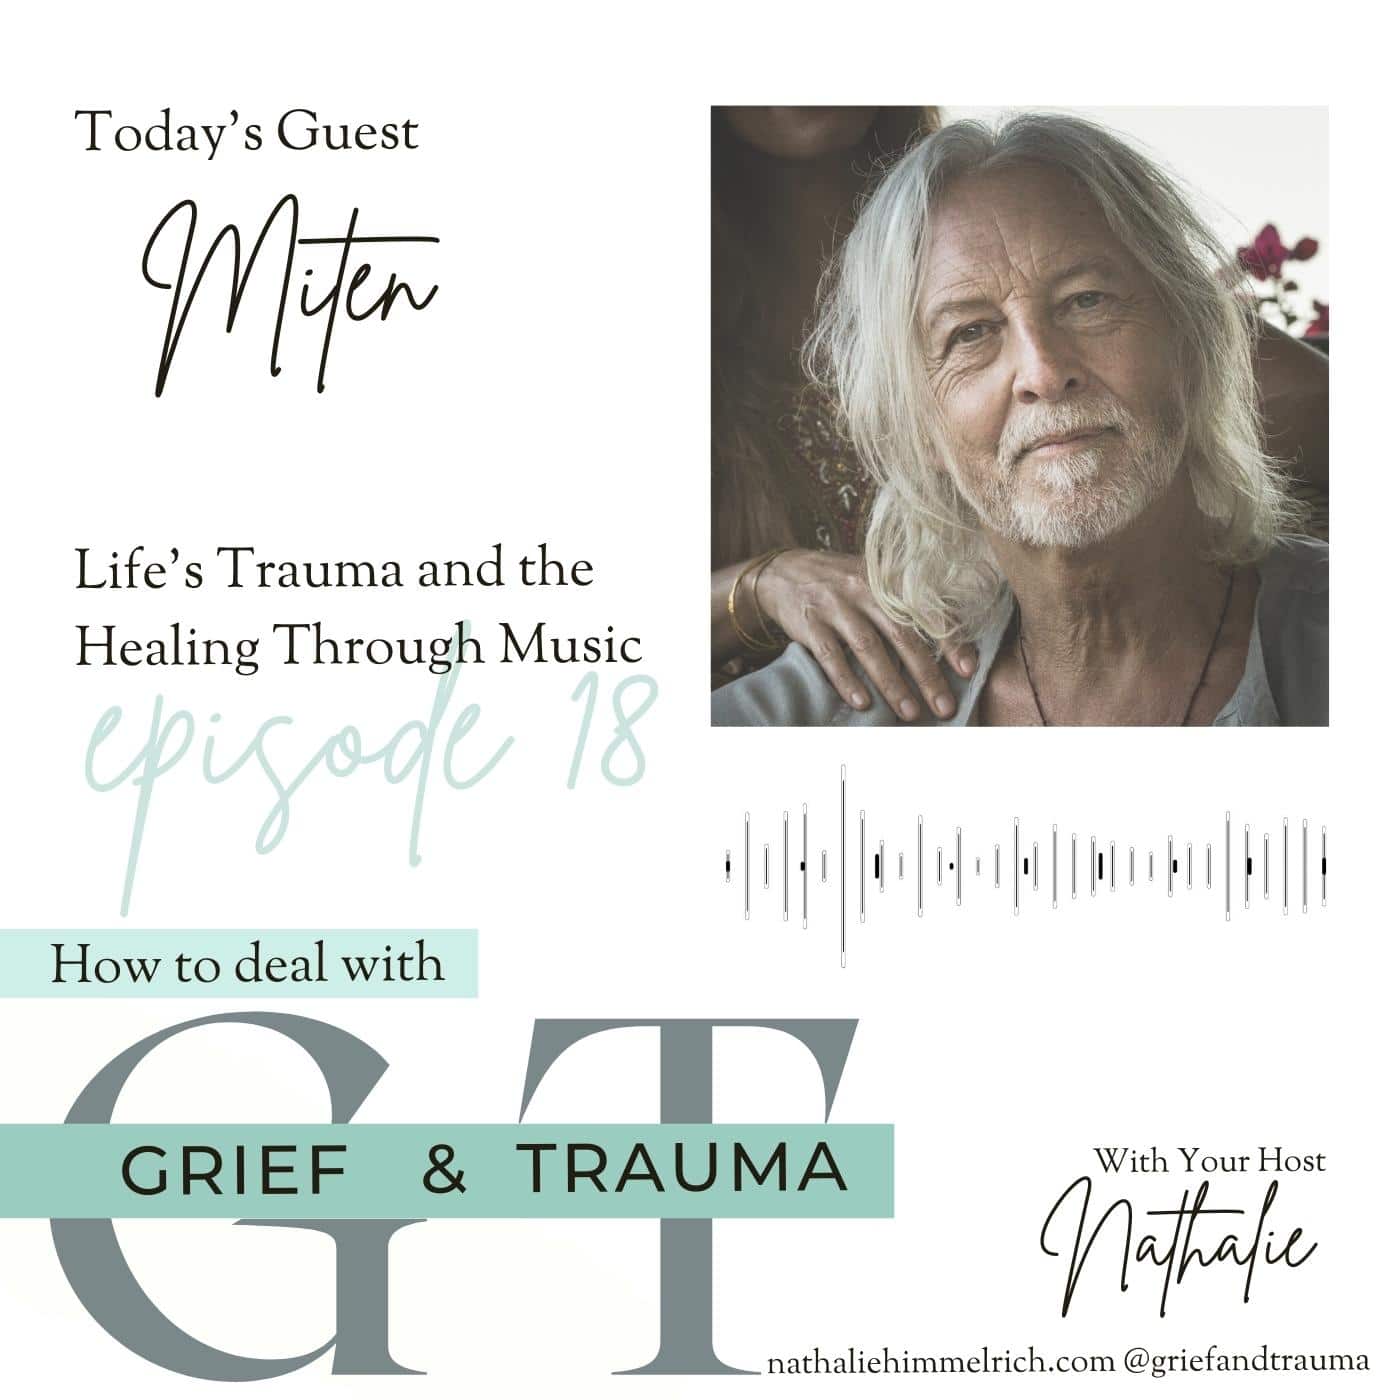 Nathalie with Miten on Life’s Trauma and the Healing Through Music | Episode 18